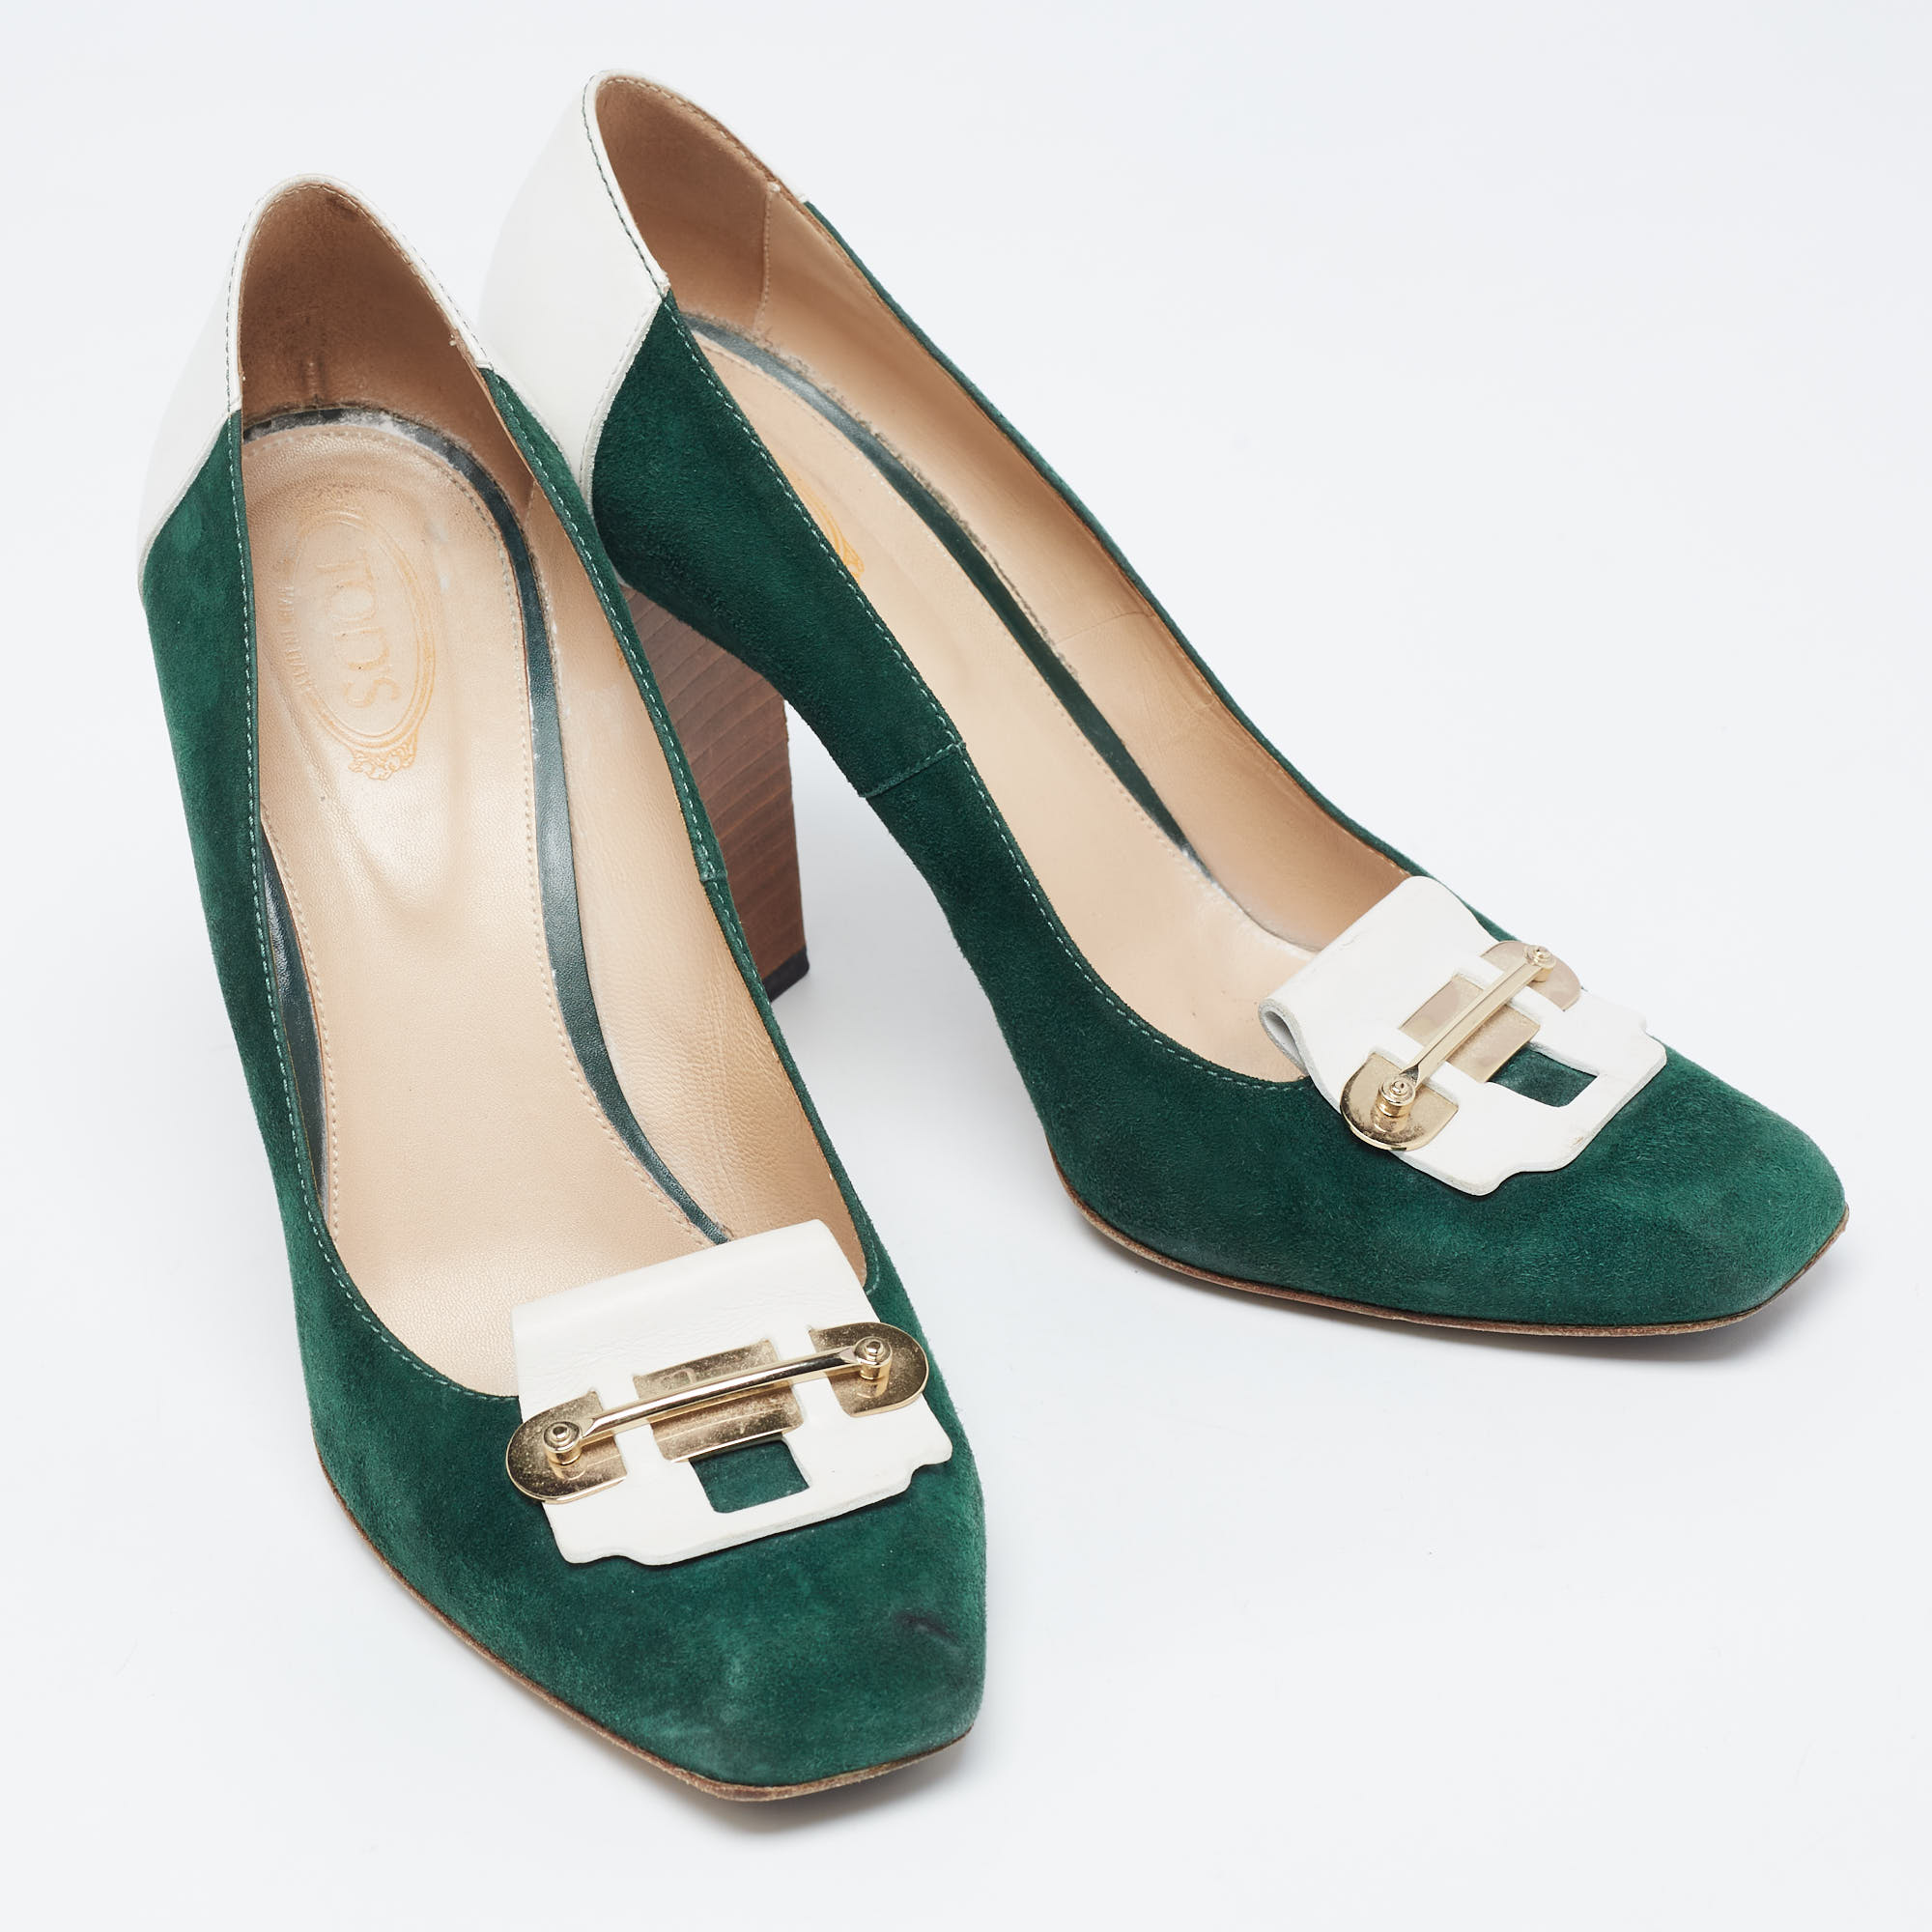 Tod's Green/White Leather And Suede Loafer Pumps Size 40